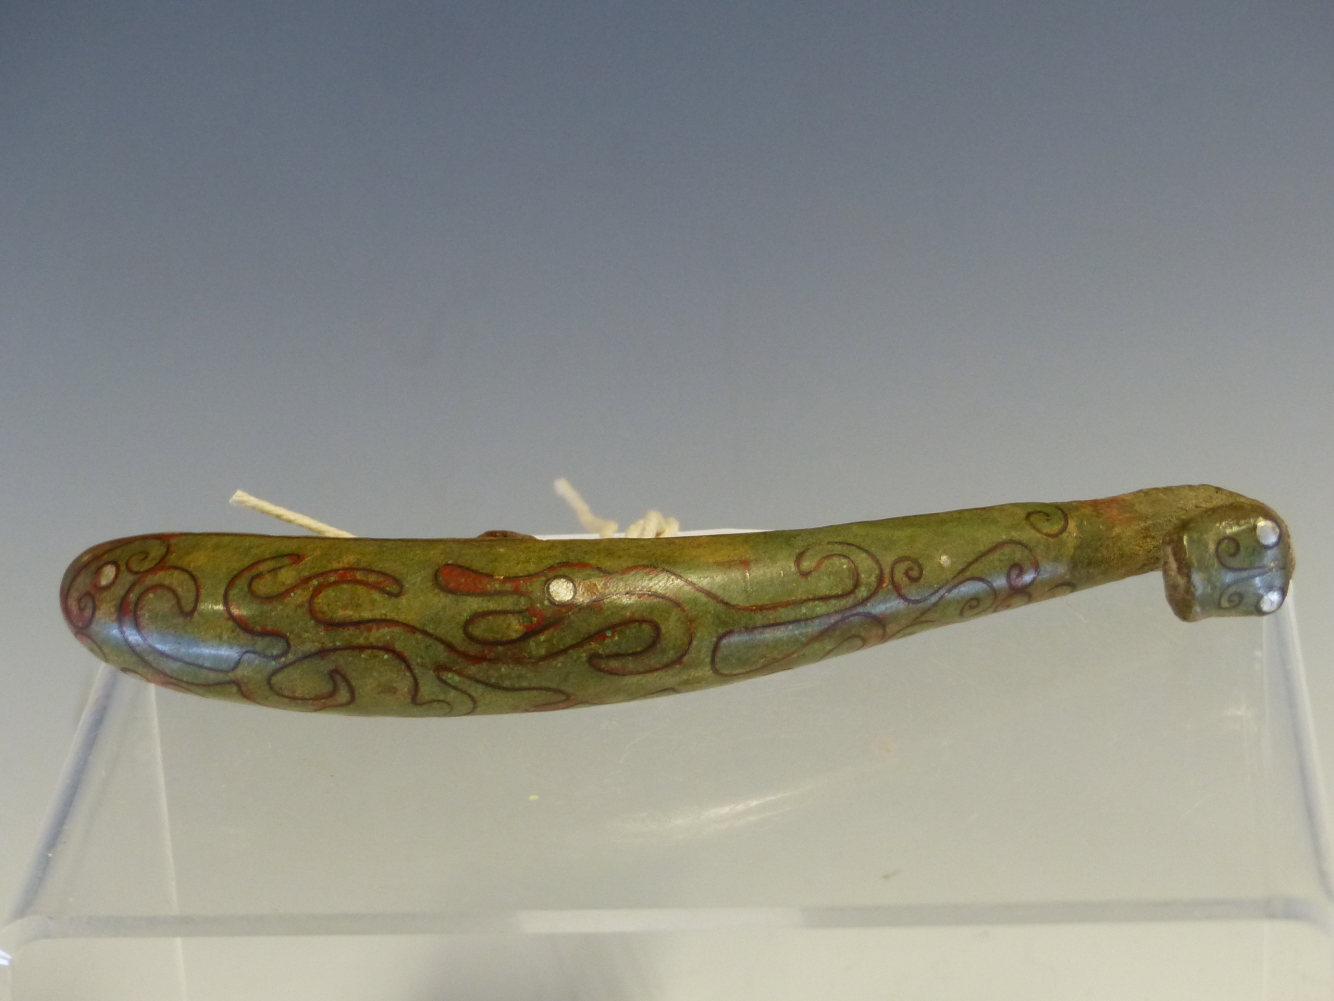 AN EARLY CHINESE BRONZE BELT HOOK, THE DRAGON FORM INLAID WITH COPPER WIRE AND SILVER STIPPLES. - Image 8 of 8